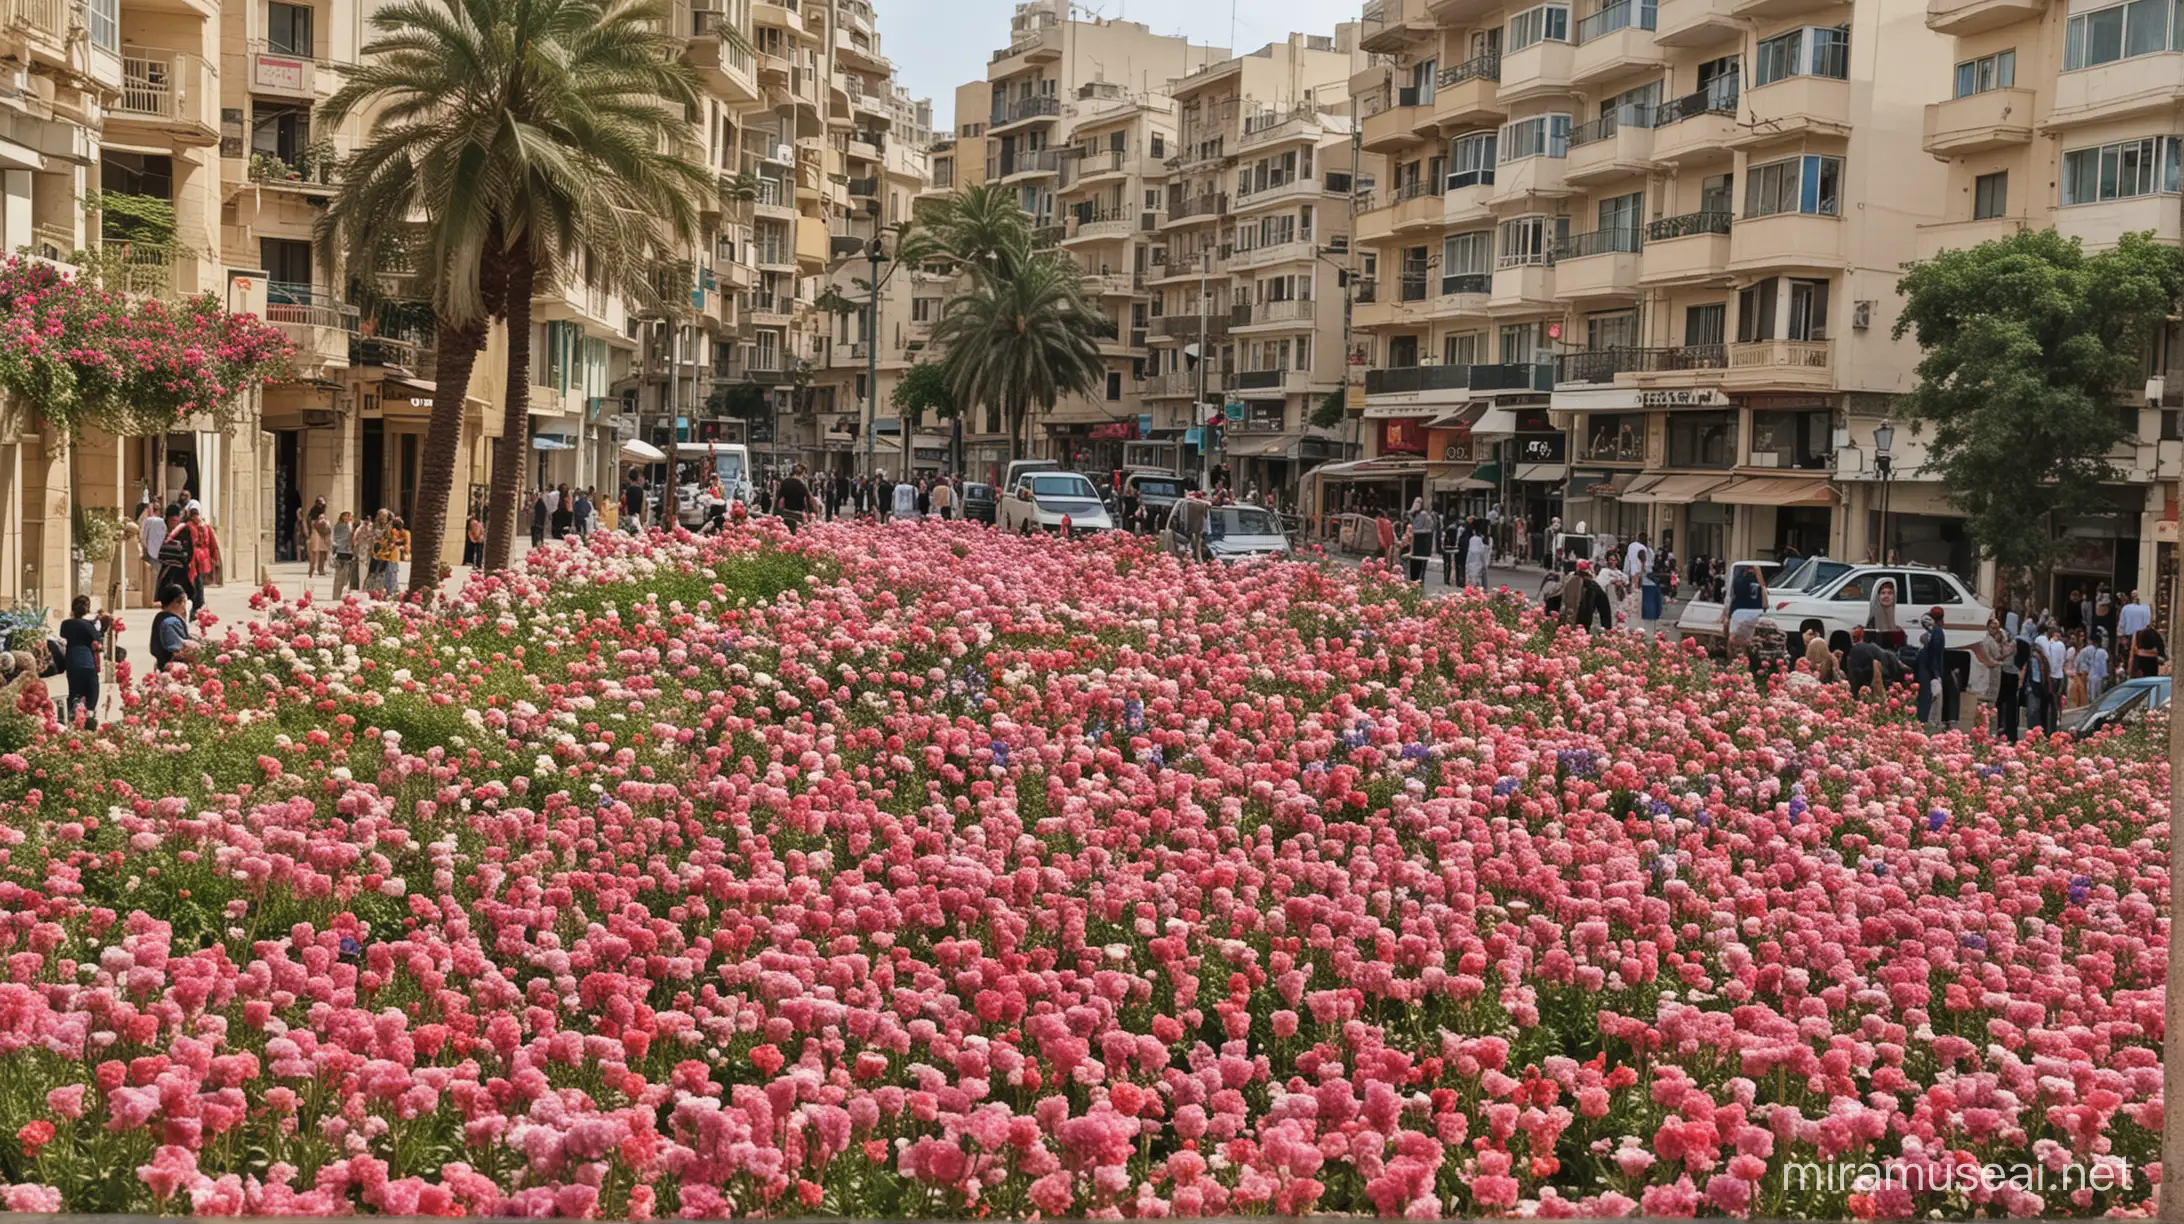 Colorful Flower Market in Beirut